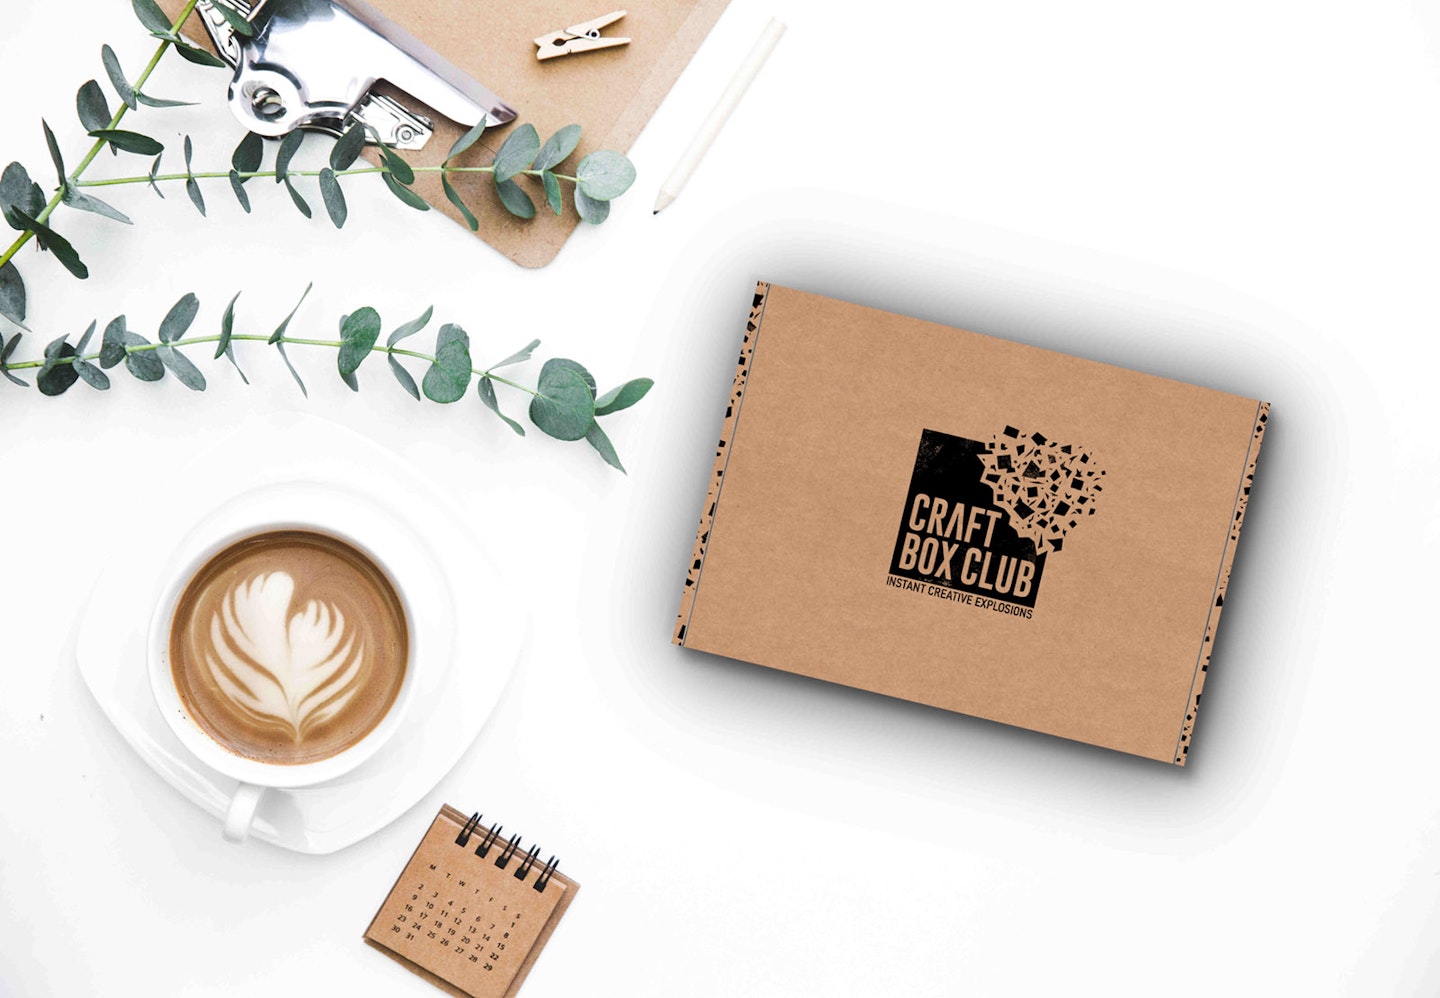 Everything from Craft Box Club is plastic free